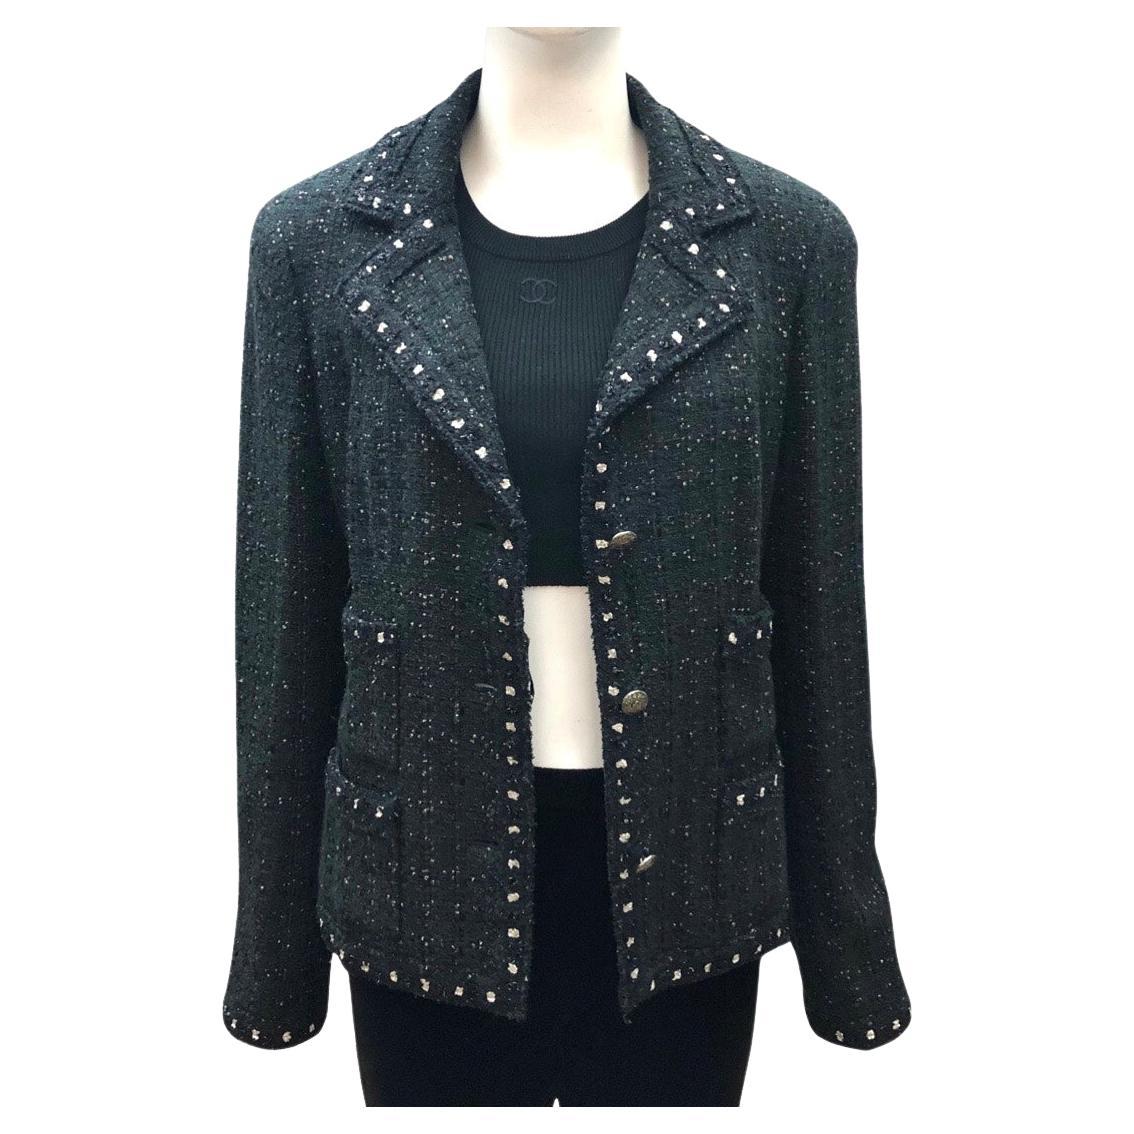 Chanel Cotton/Rayon Black and Dark Green with Multi-Colours Tweed Jacket 